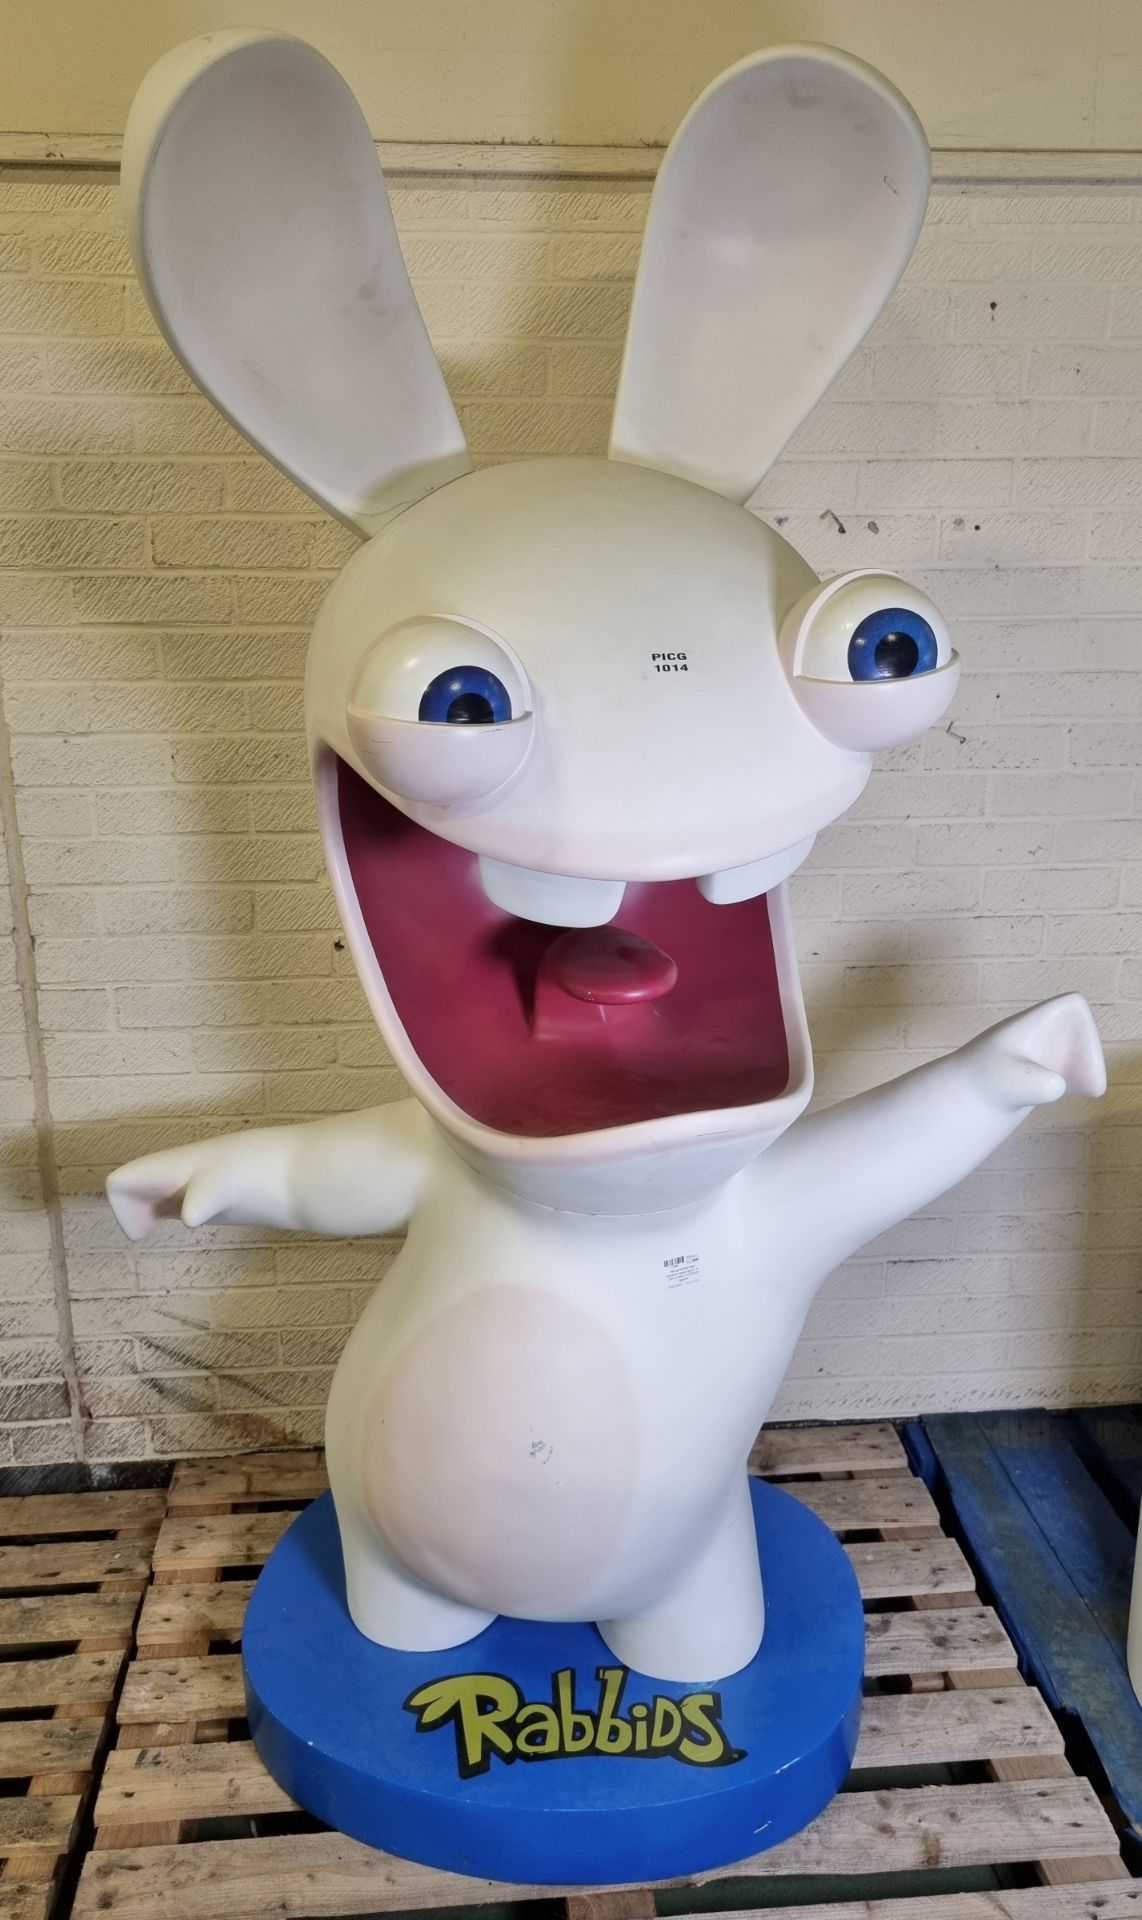 Raving Rabbids large exhibition display figure - W 1250 x D 850 x H 2000mm (approx)